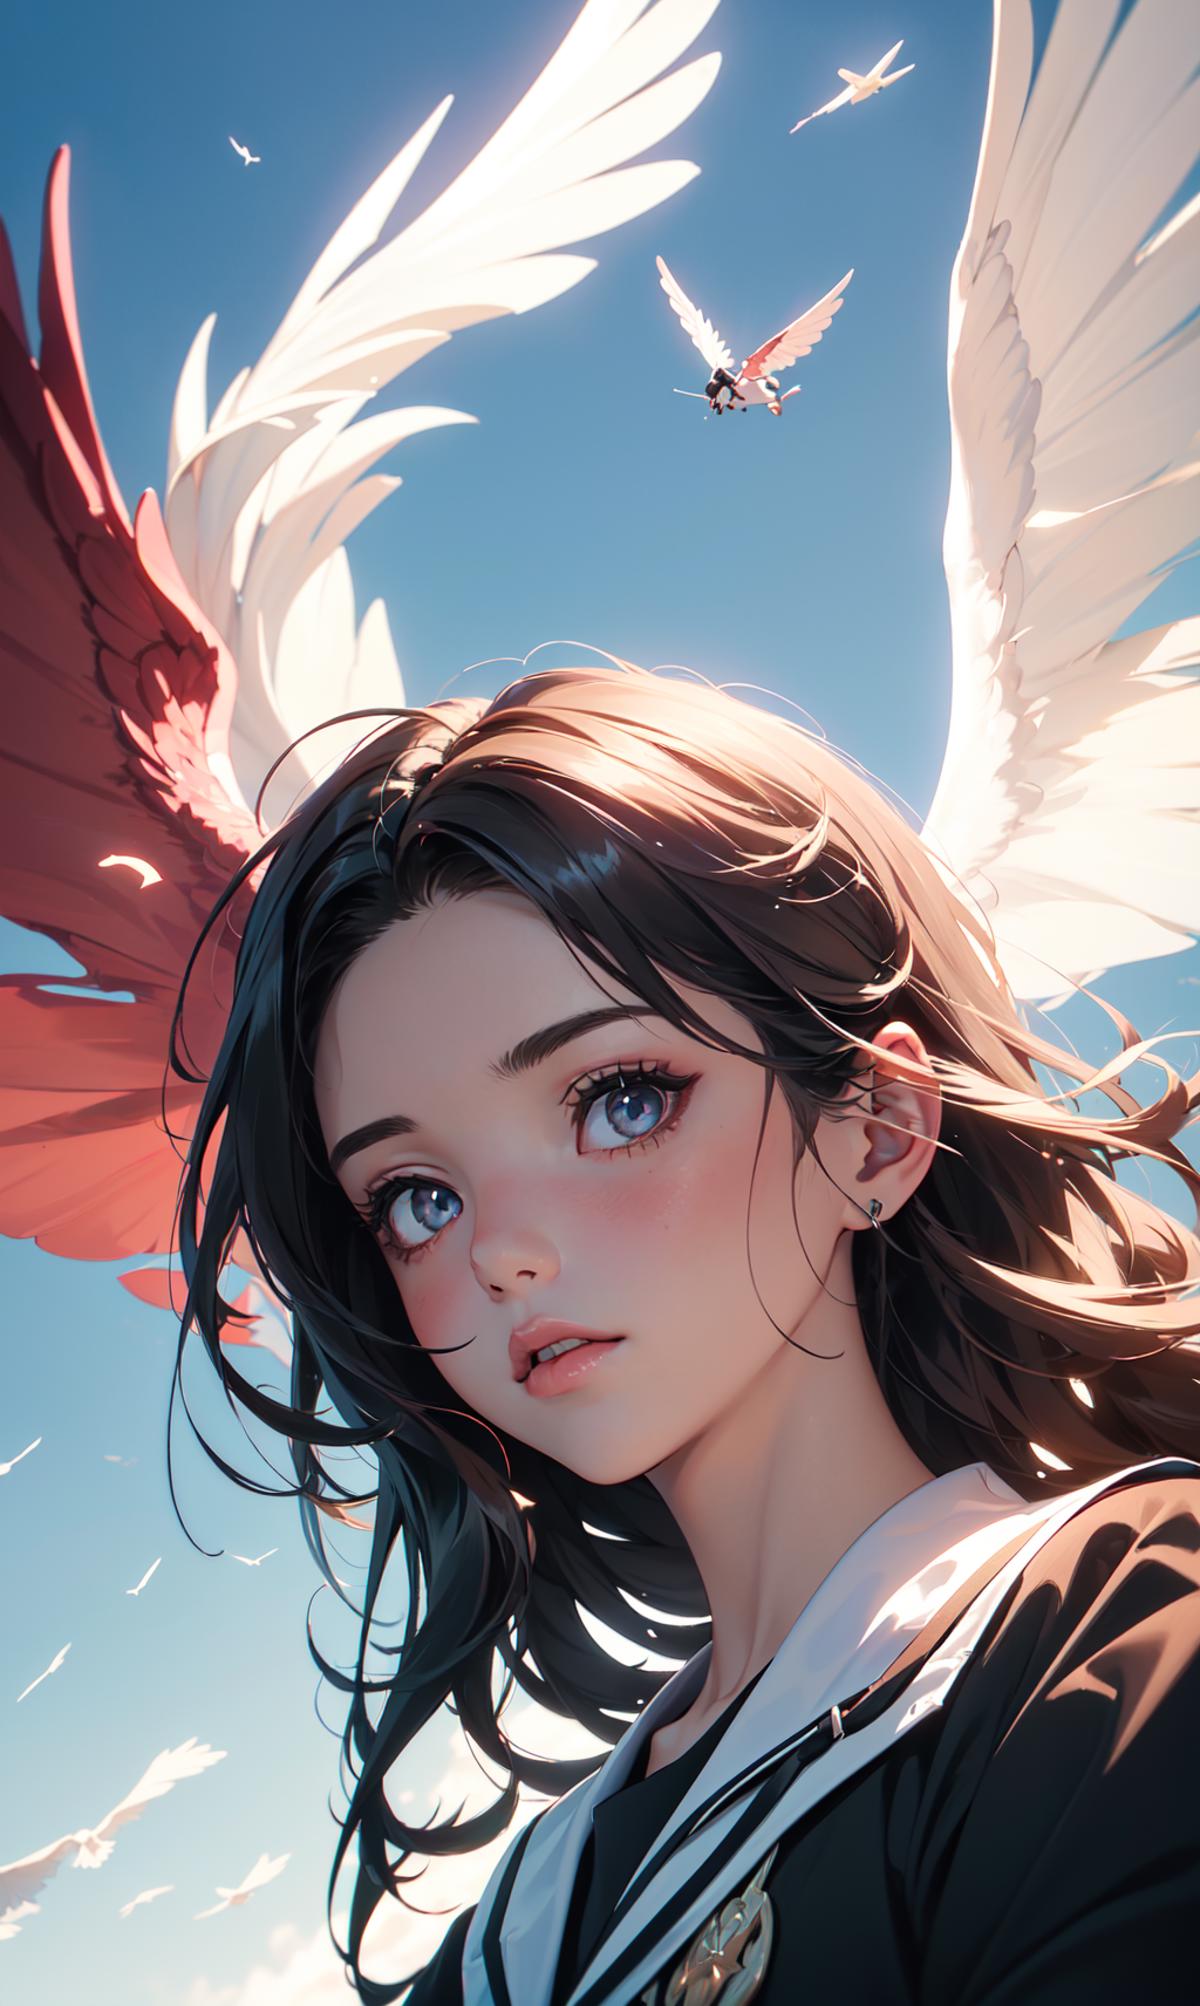 Anime girl with wings and blue eyes.